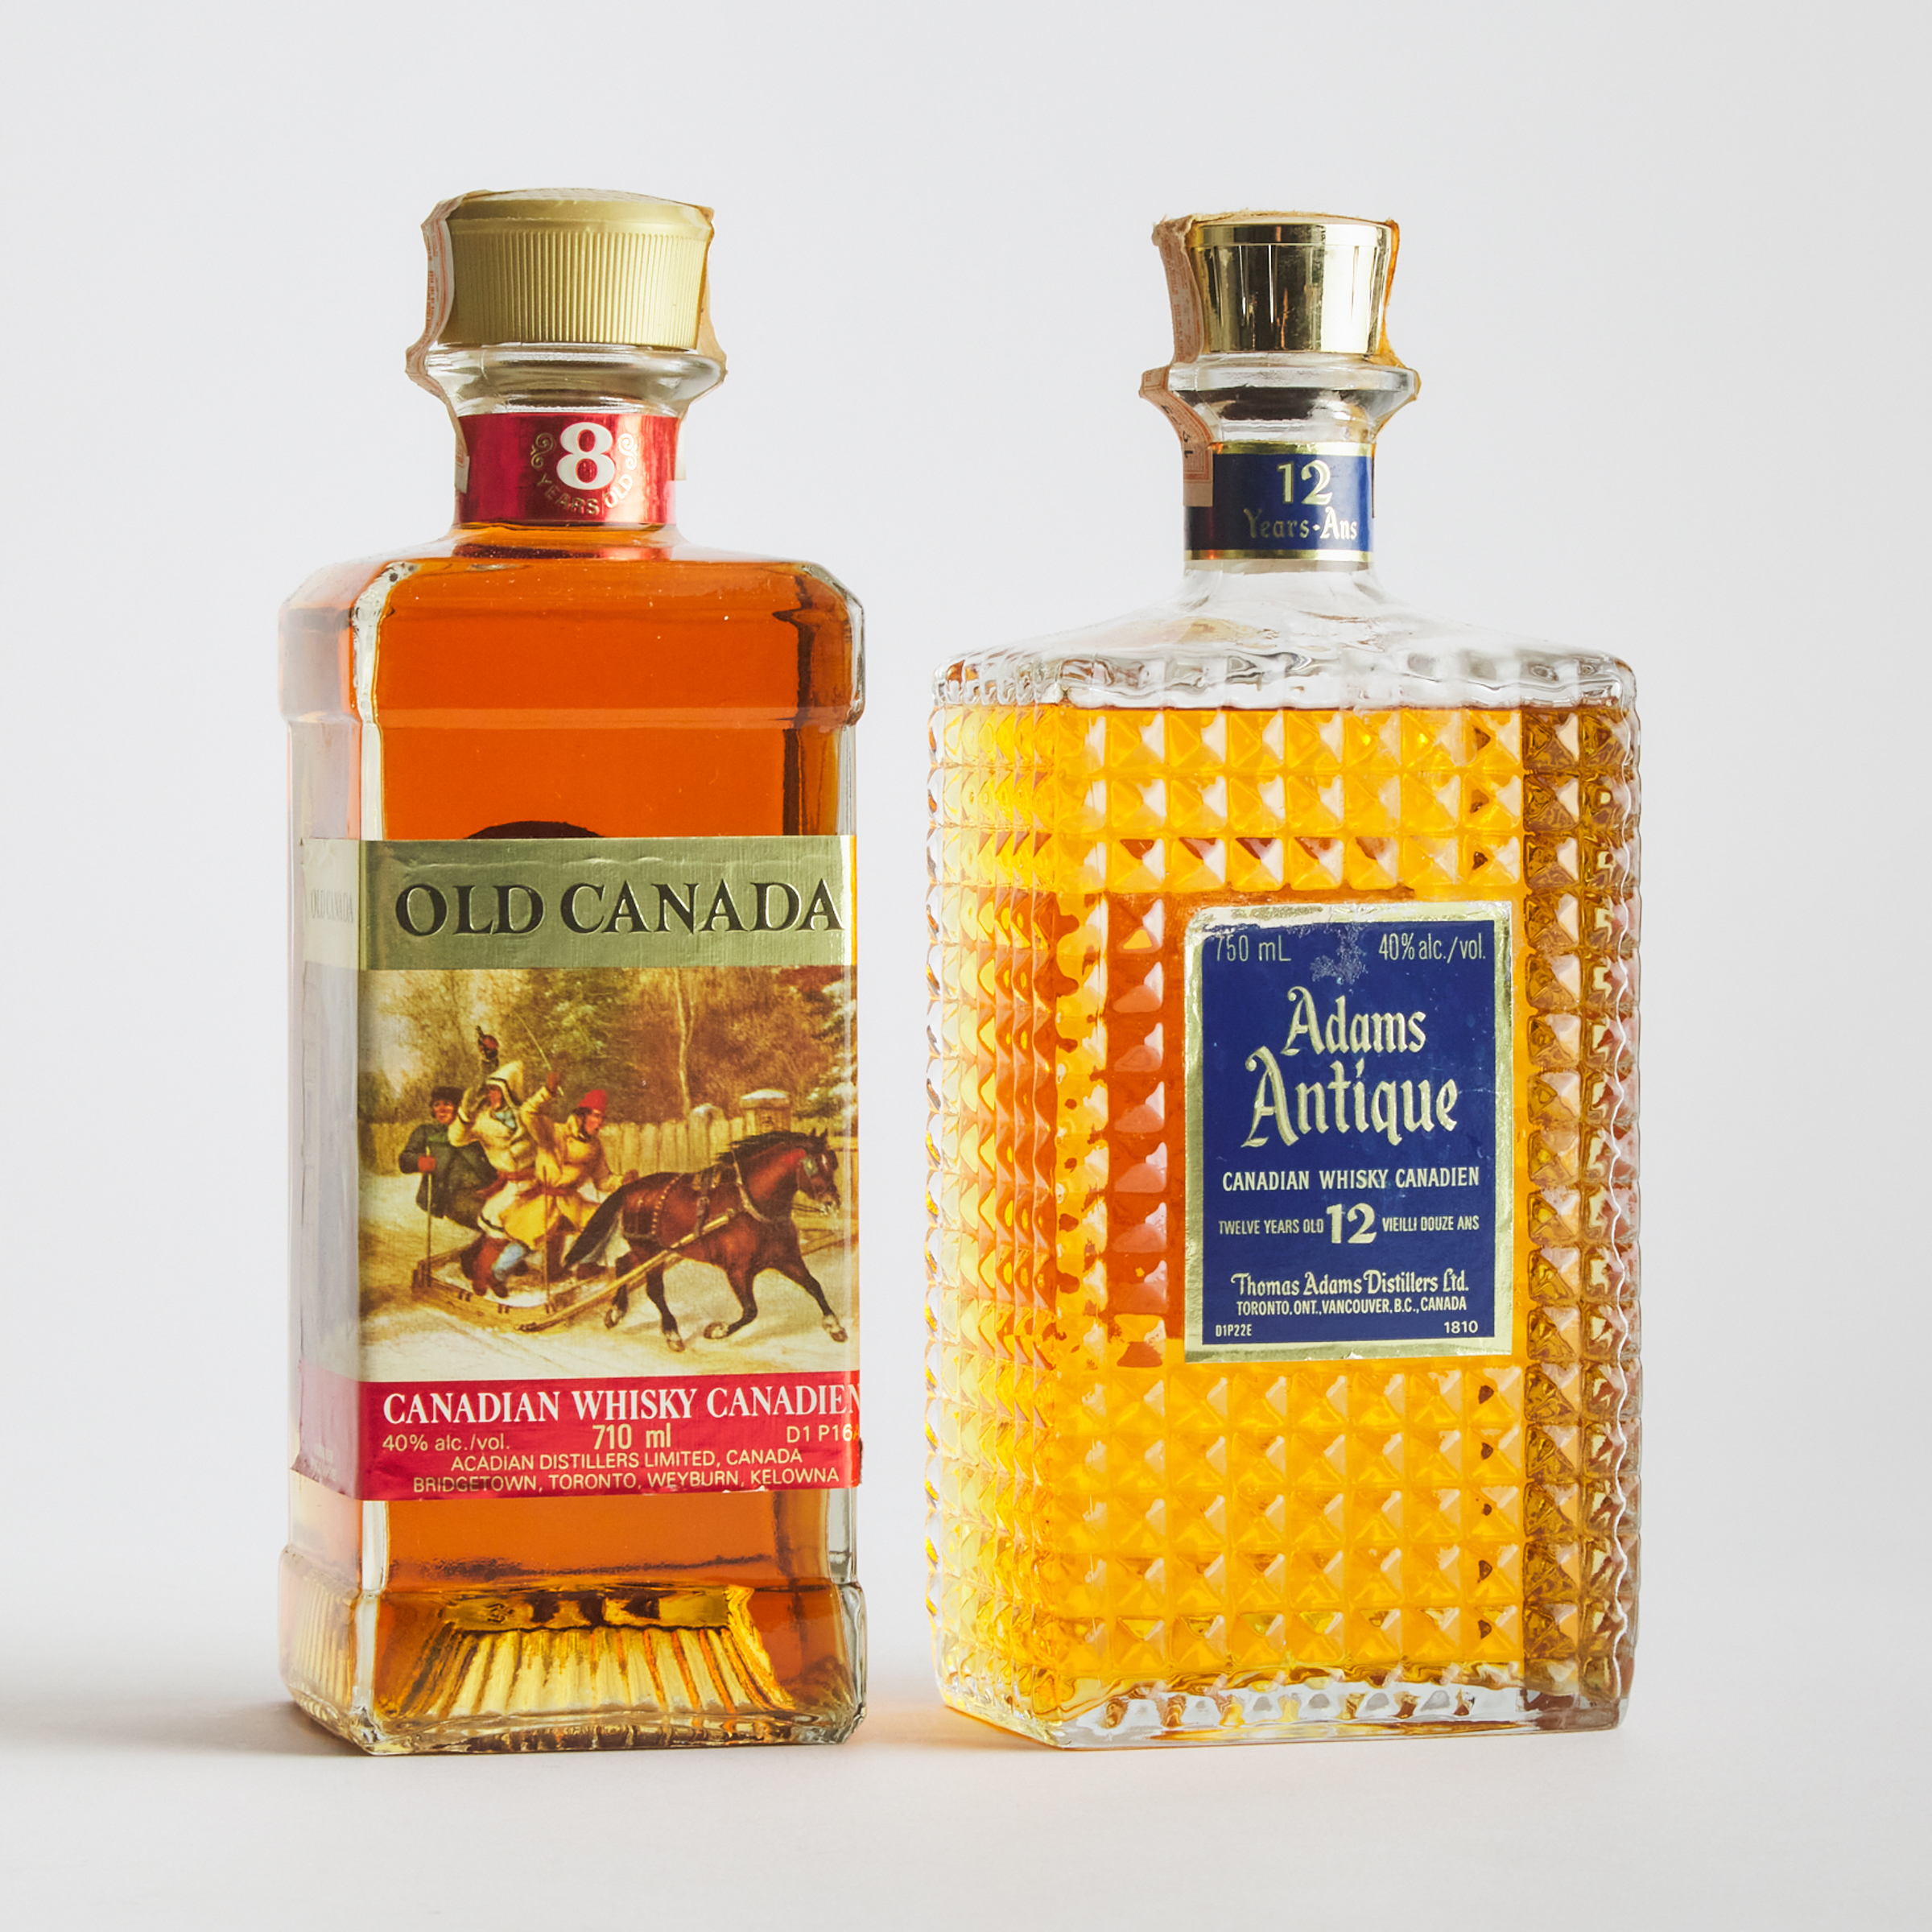 ADAMS ANTIQUE CANADIAN WHISKY 12 YEARS (ONE 750 ML)
OLD CANADA CANADIAN WHISKY 8 YEARS (ONE 710 ML)